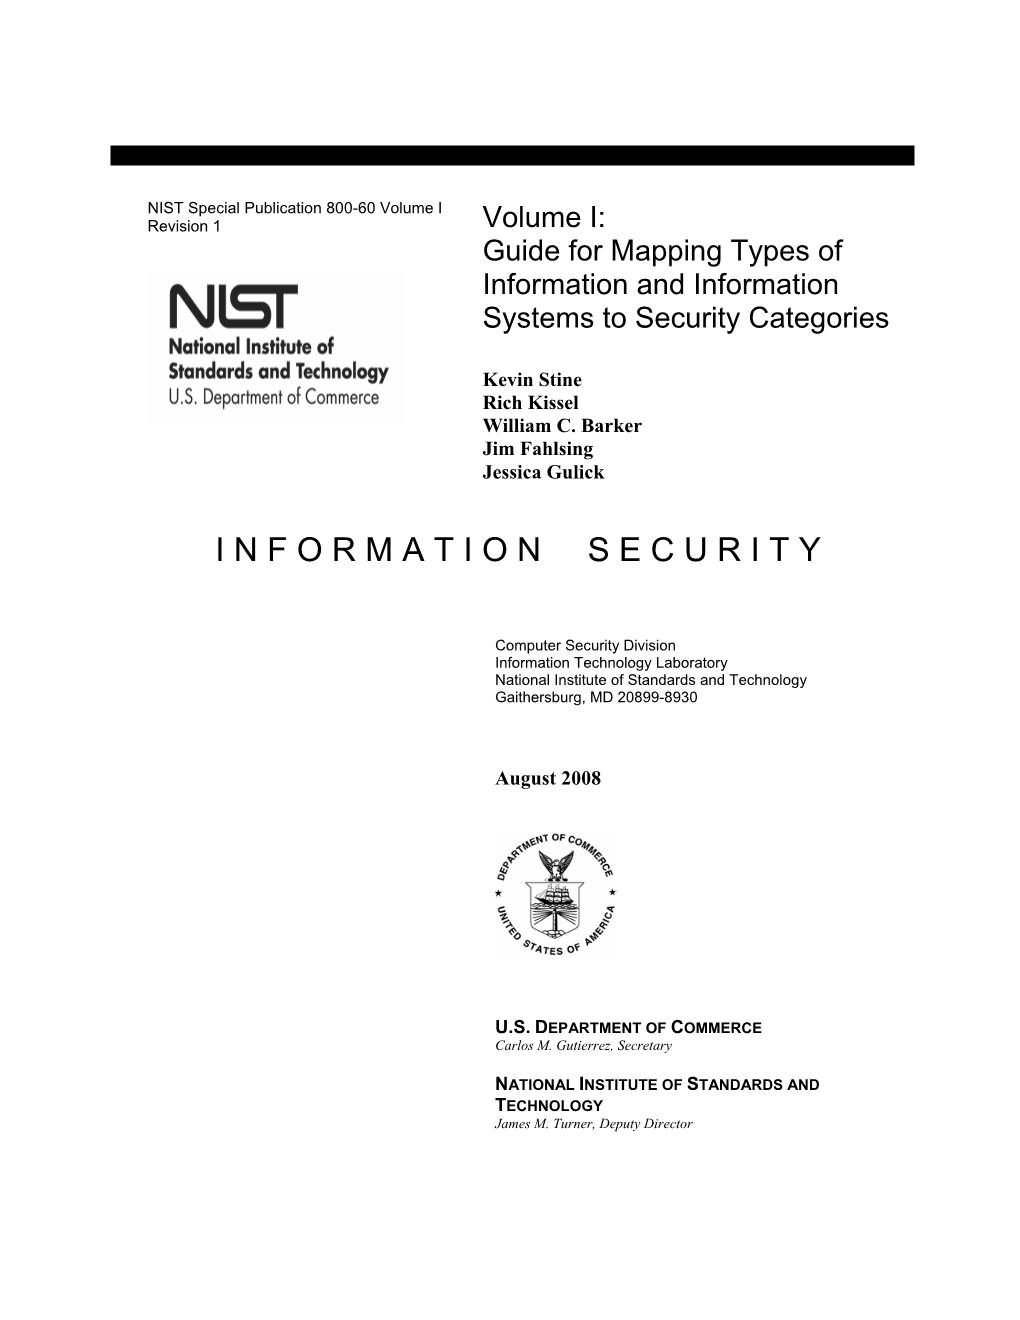 NIST SP 800-60 Volume I Revision 1, Volume I: Guide for Mapping Types